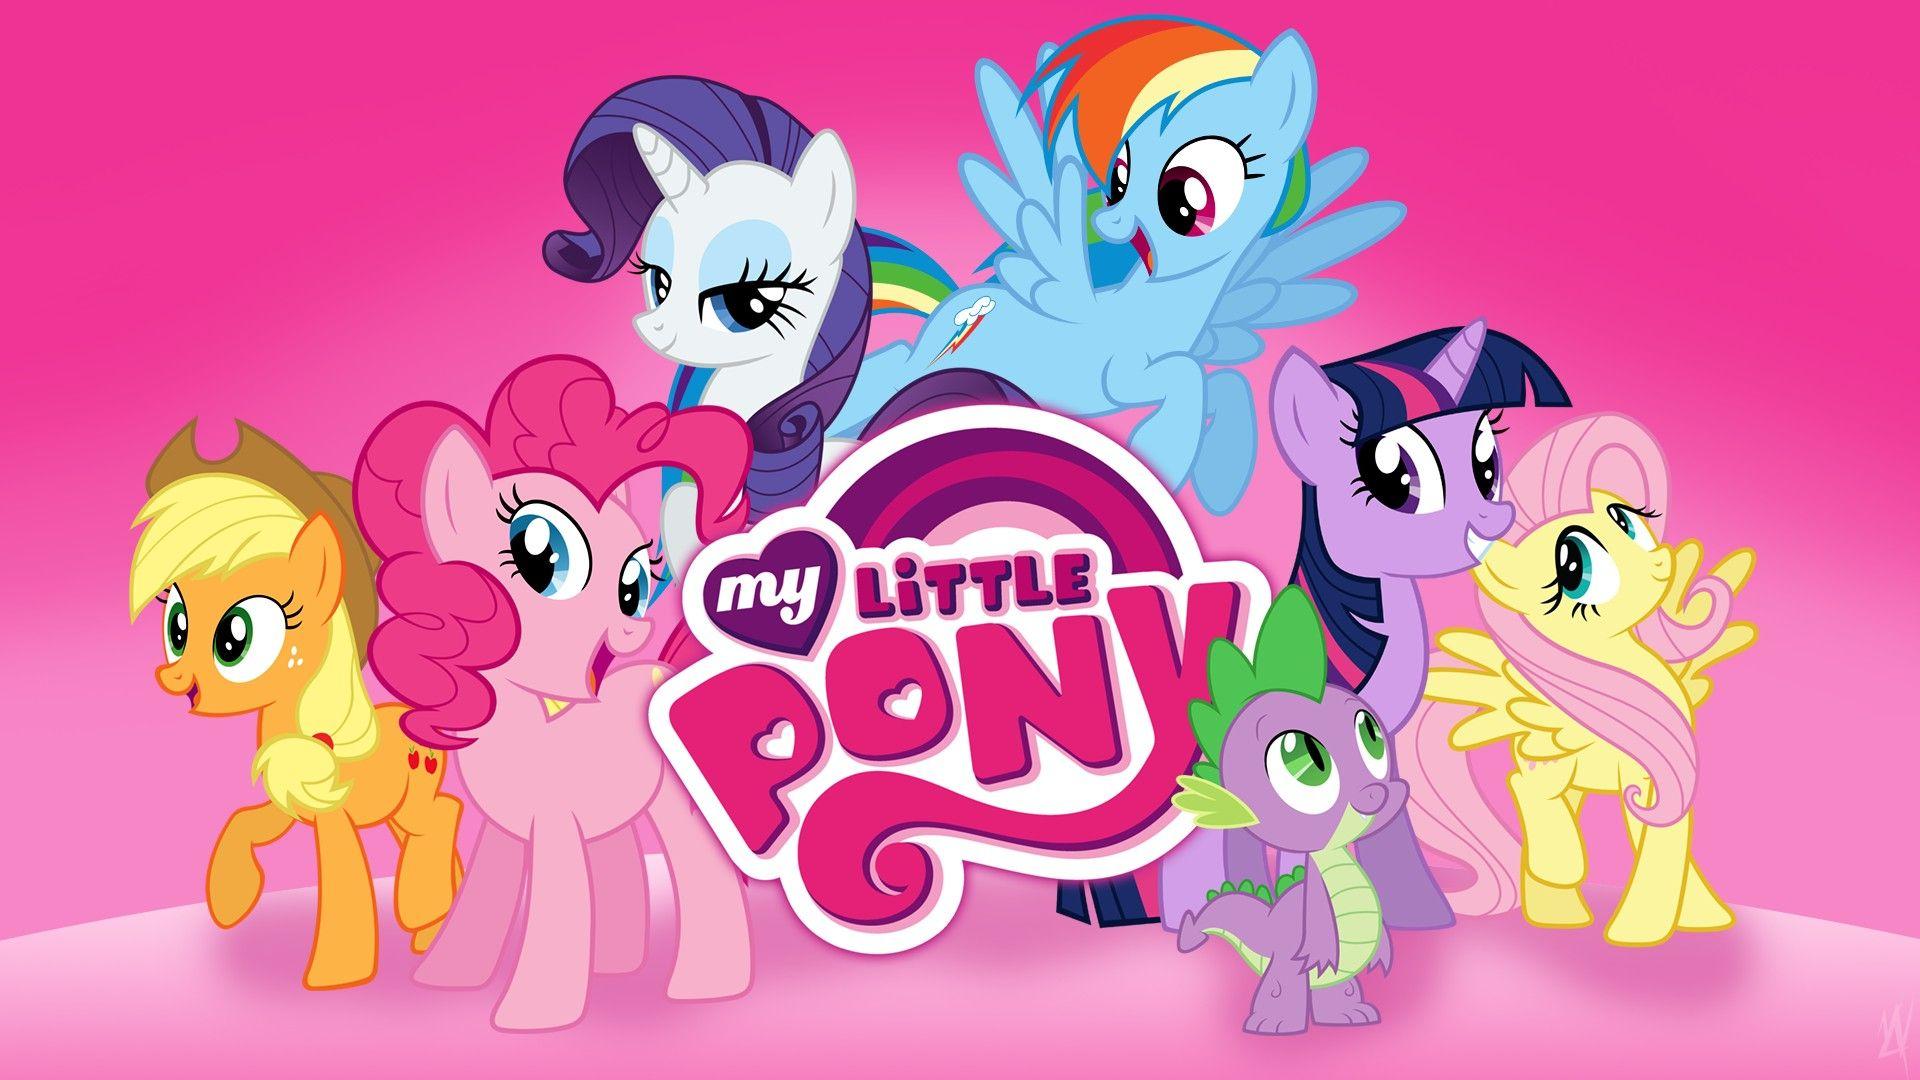 My Little Pony backgroundDownload free amazing full HD